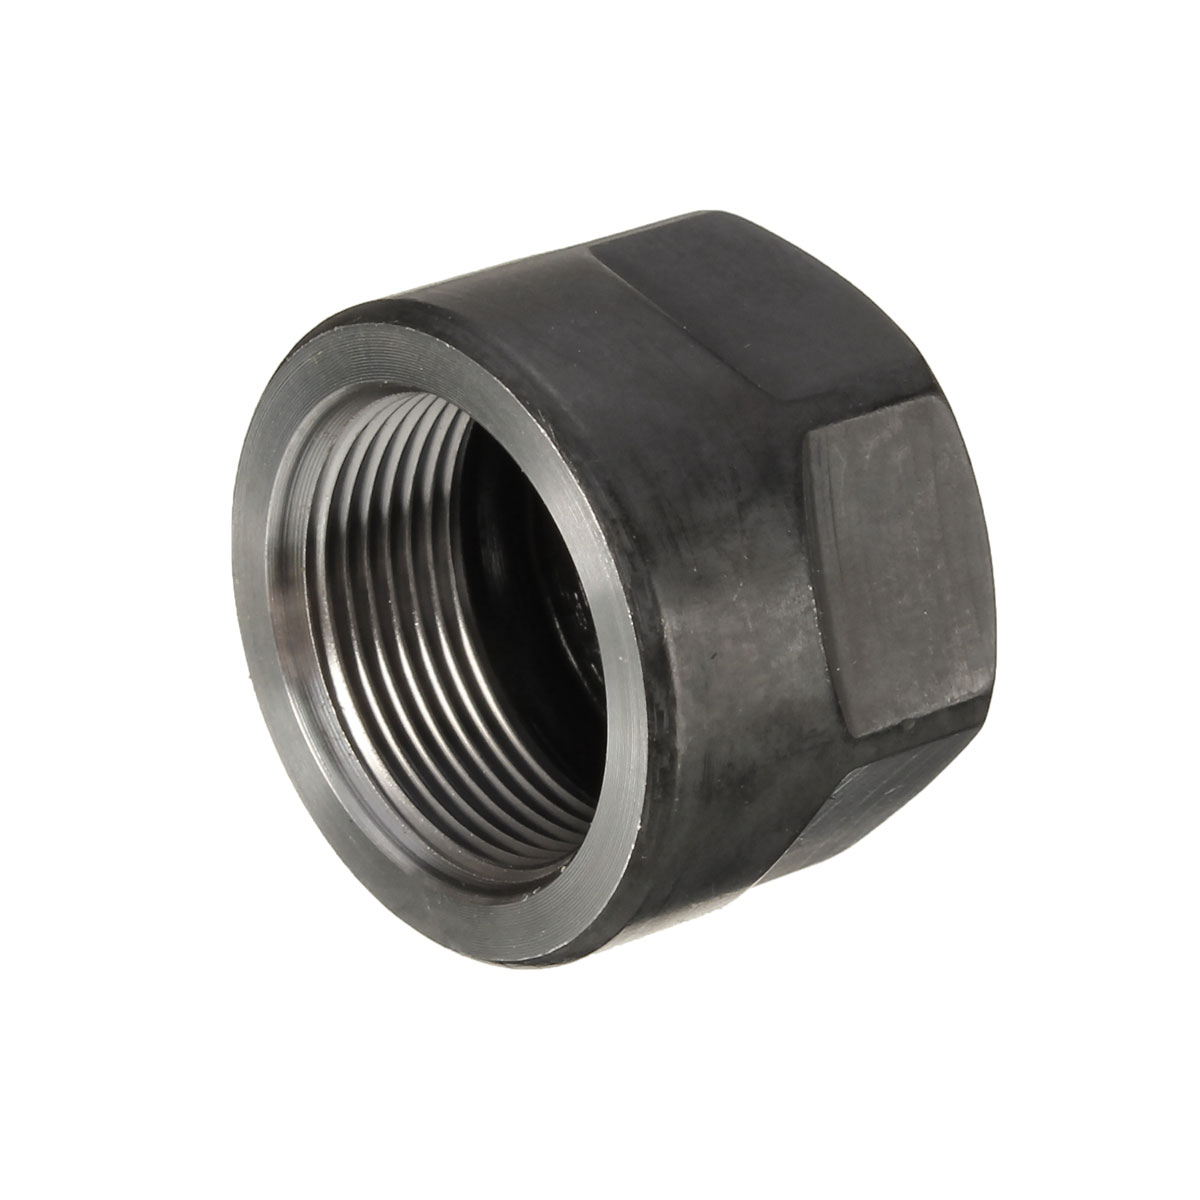 ER--A-M-Type-Nut-Collet-Clamping-Nut-for-CNC-Milling-Chuck-Holder-Lathe-Tool-1064956-9